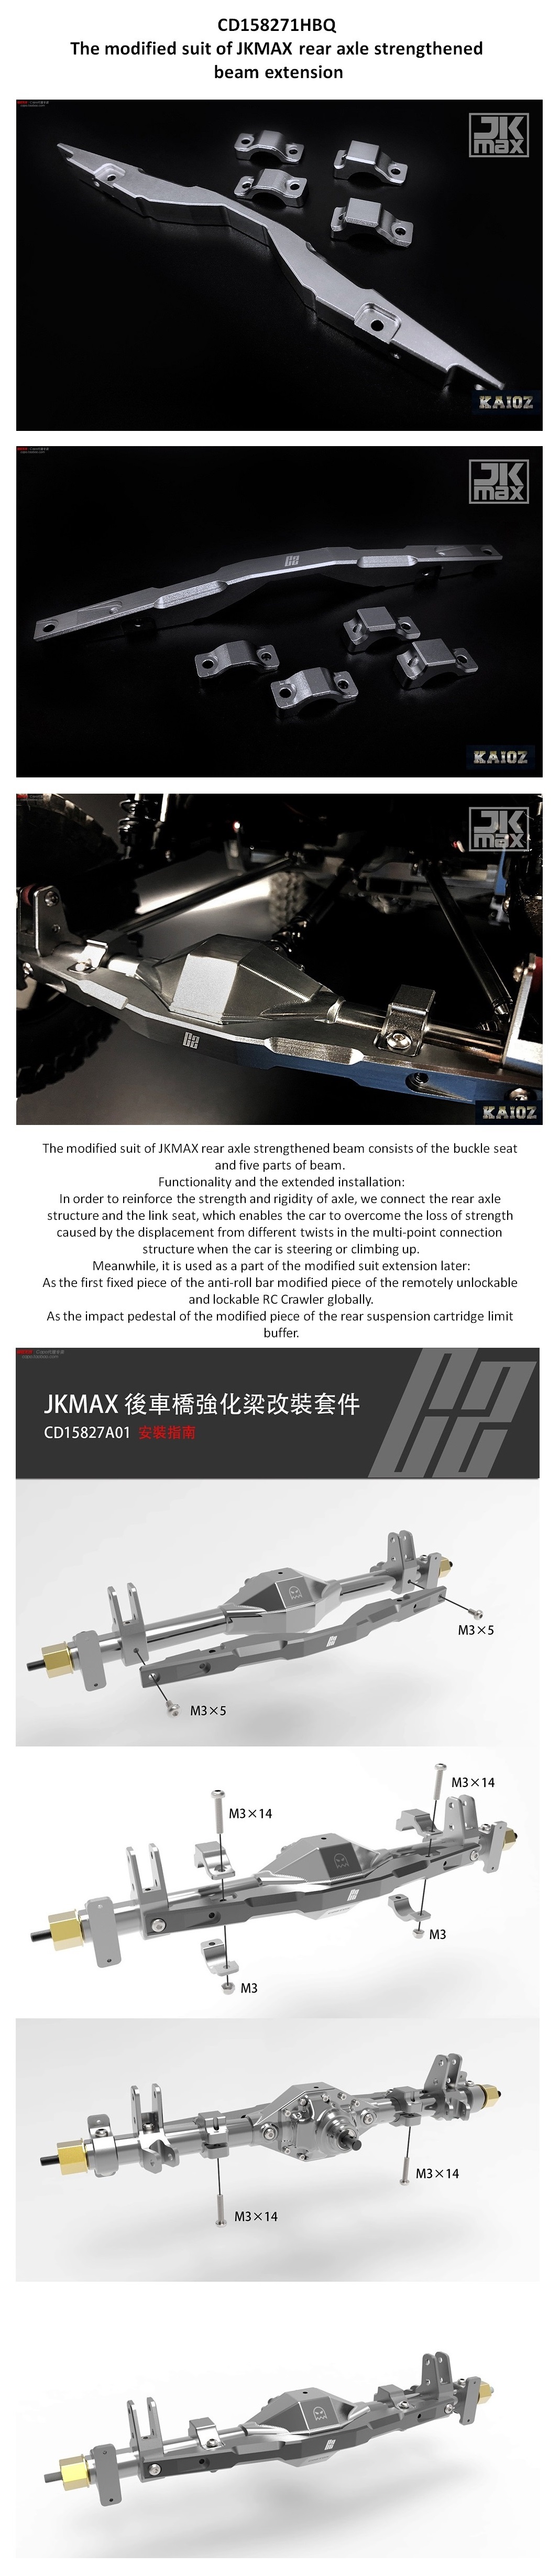 02_CD158271HBQ_C2後車橋強化梁擴展改裝套件_C2 The modified suit of JKMAX rear axle strengthened beam extension.jpg